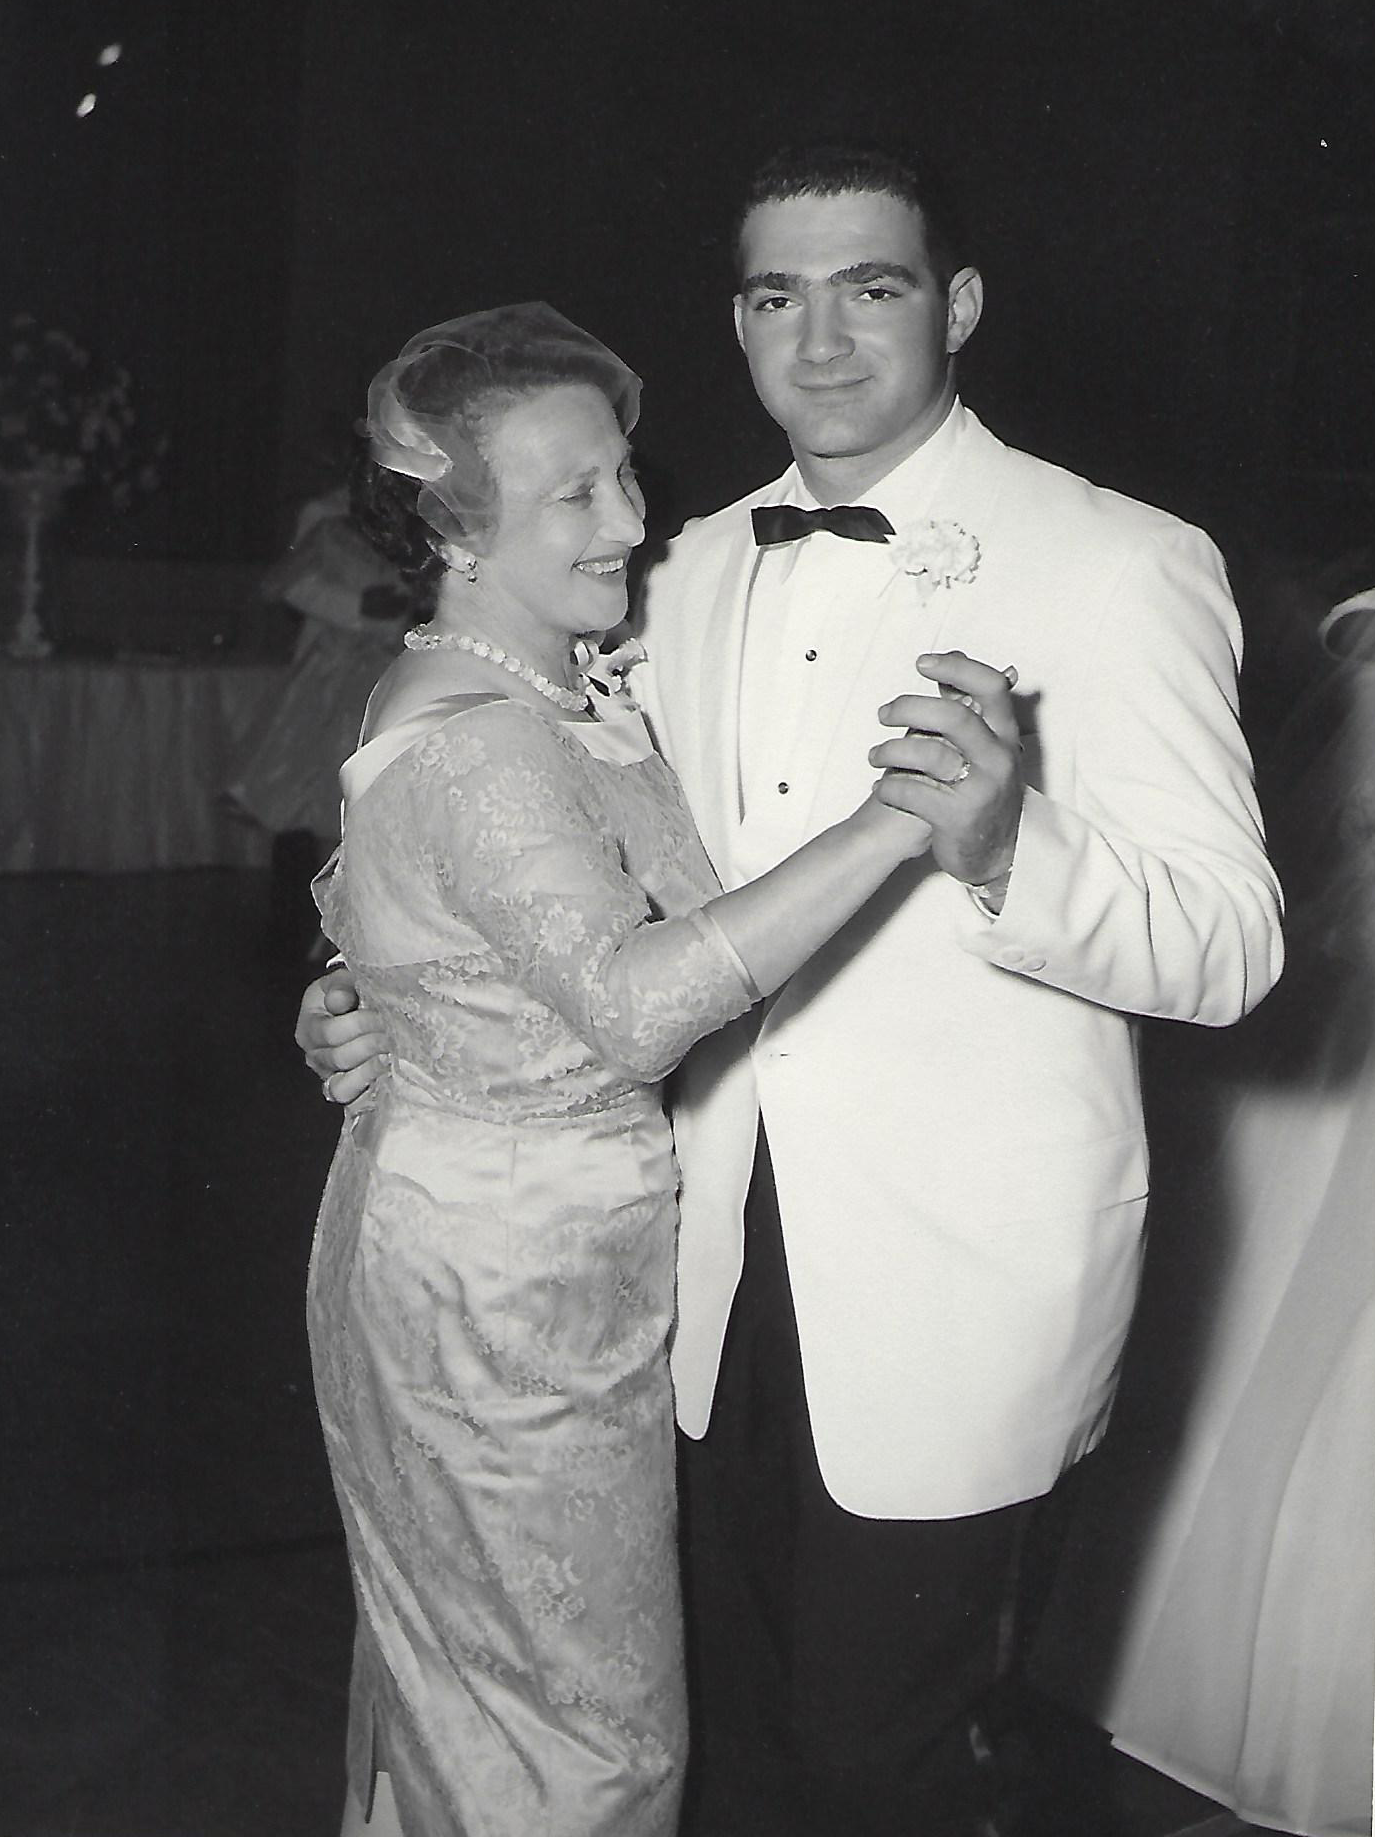 A black and white photograph of Sidney Blumner in formal attire dancing with a woman in a dress.